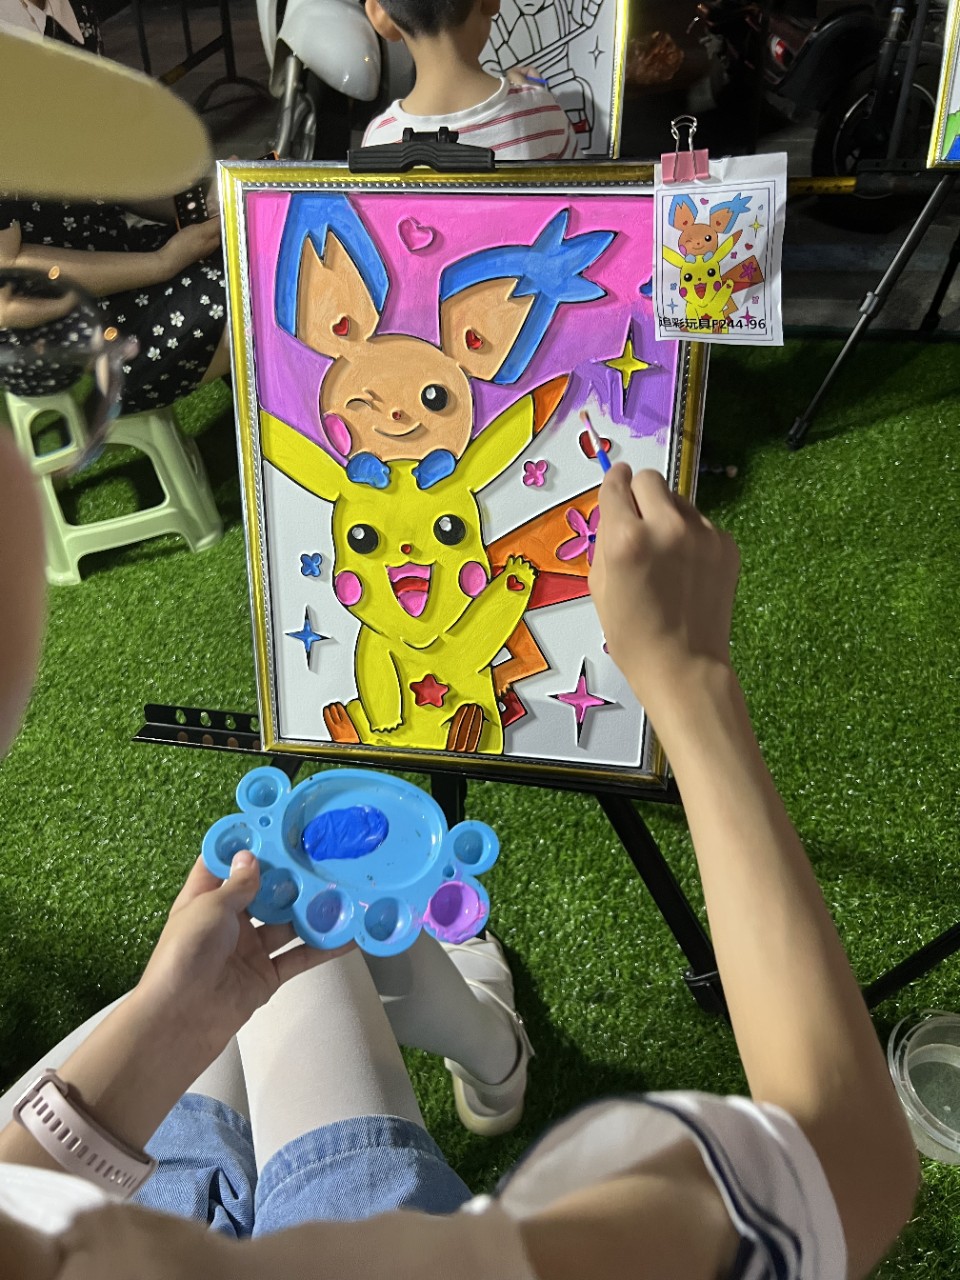 New Stall Concave-Convex Drawing Board Three-Dimensional Children Diy Park Square Night Market Stall Graffiti Drawing Board Wholesale